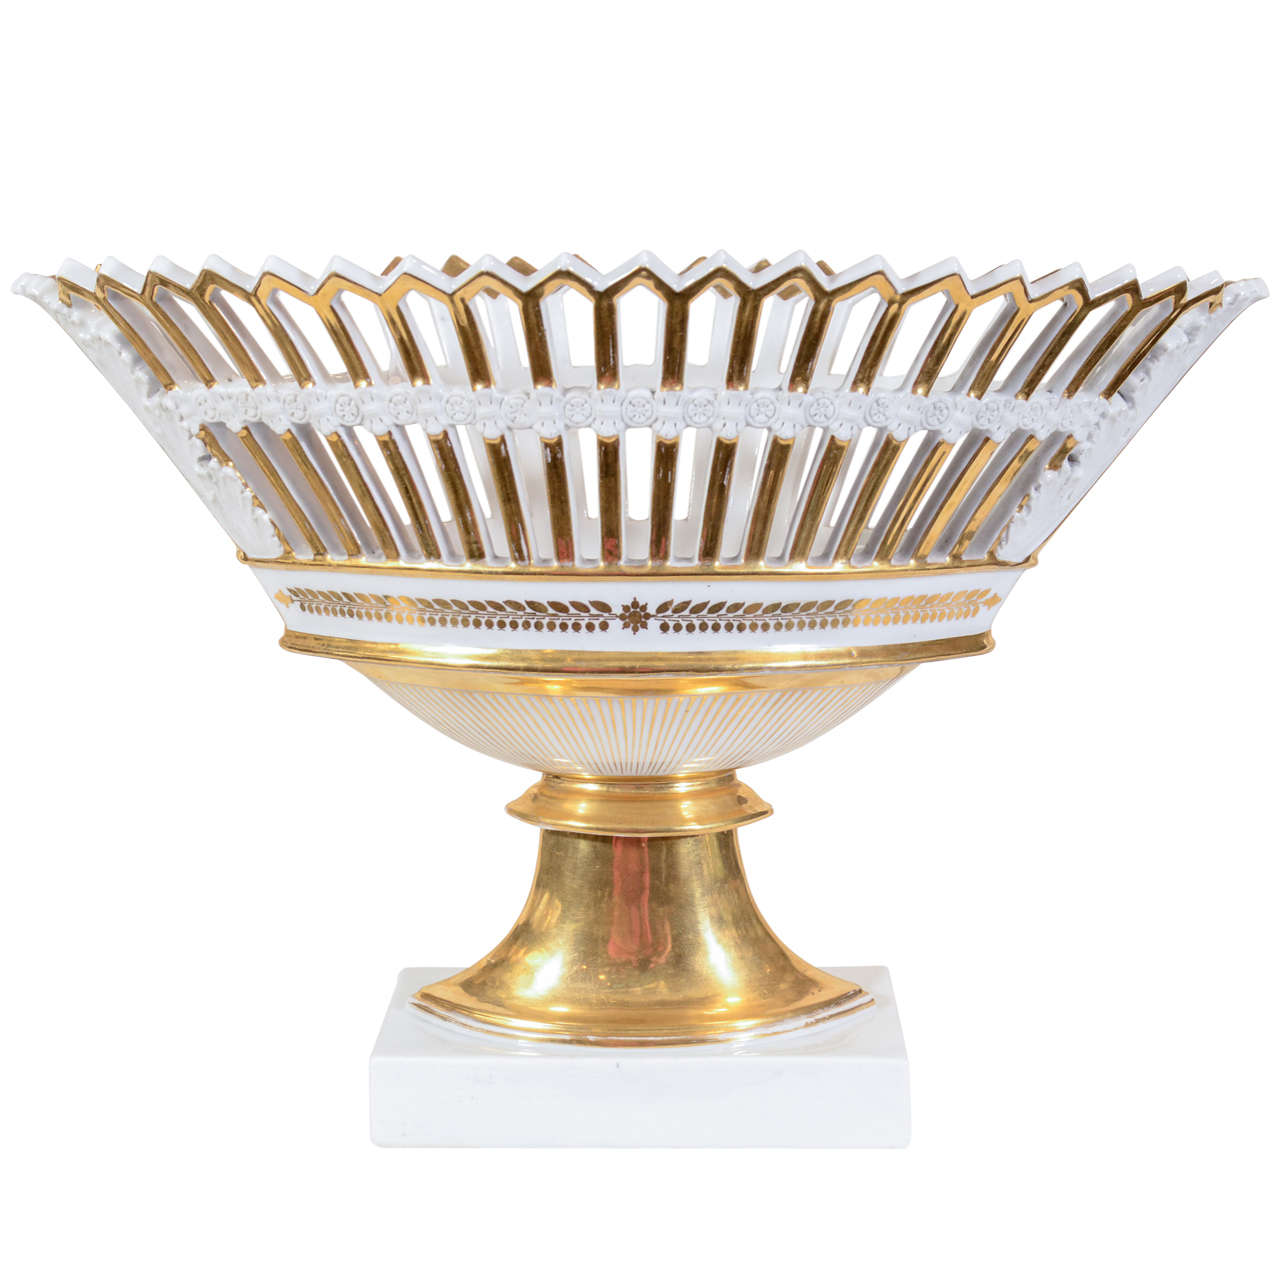 A Large White and Gold Dagoty Pierced Basket